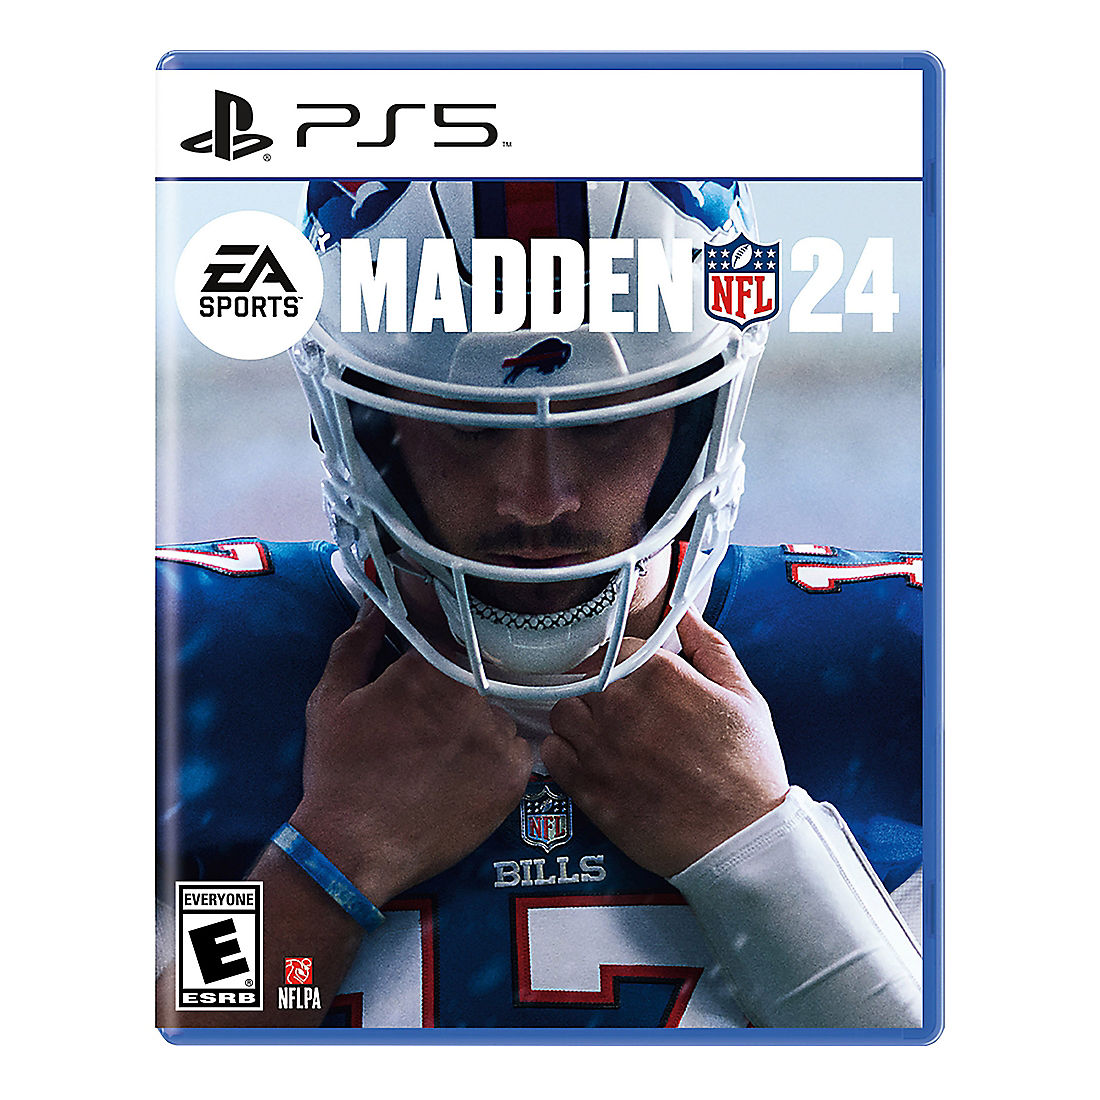 EA and NFL Renew Deal for Madden NFL Championship Series